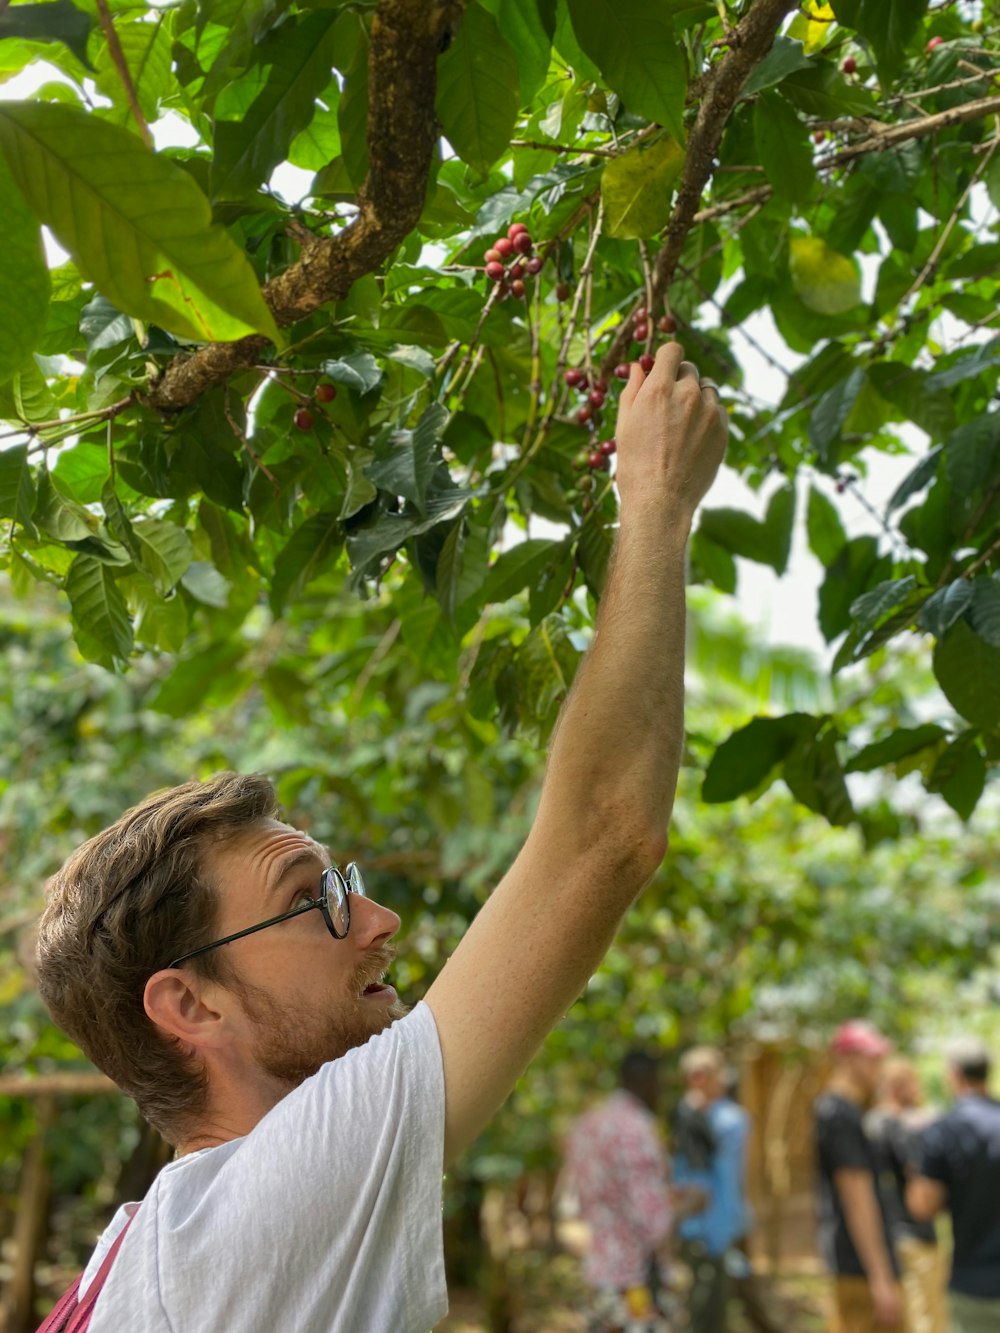 a man reaching up to pick berries from a tree